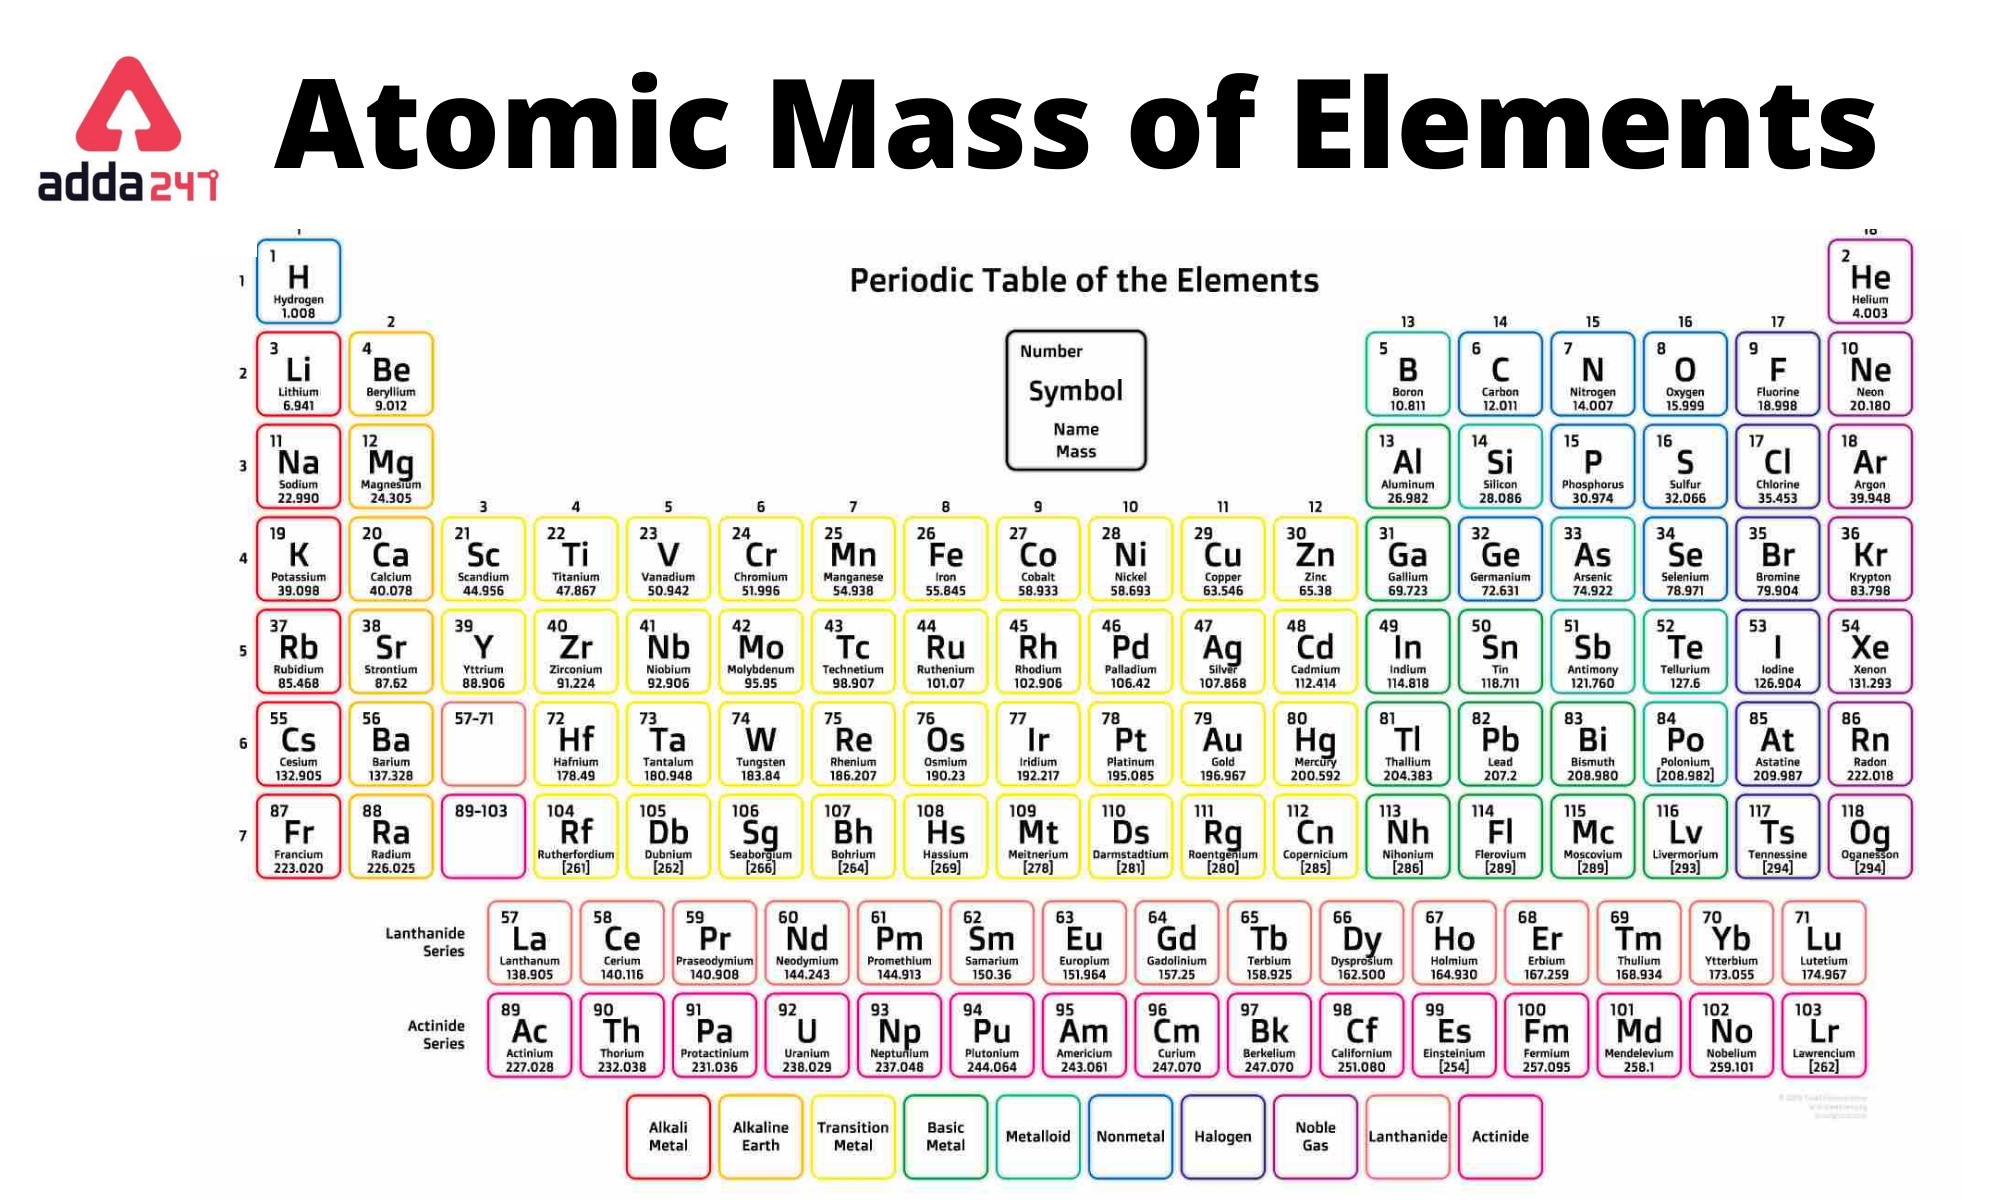 Atomic Mass Of Elements 1 To 30 With Symbols Pdf